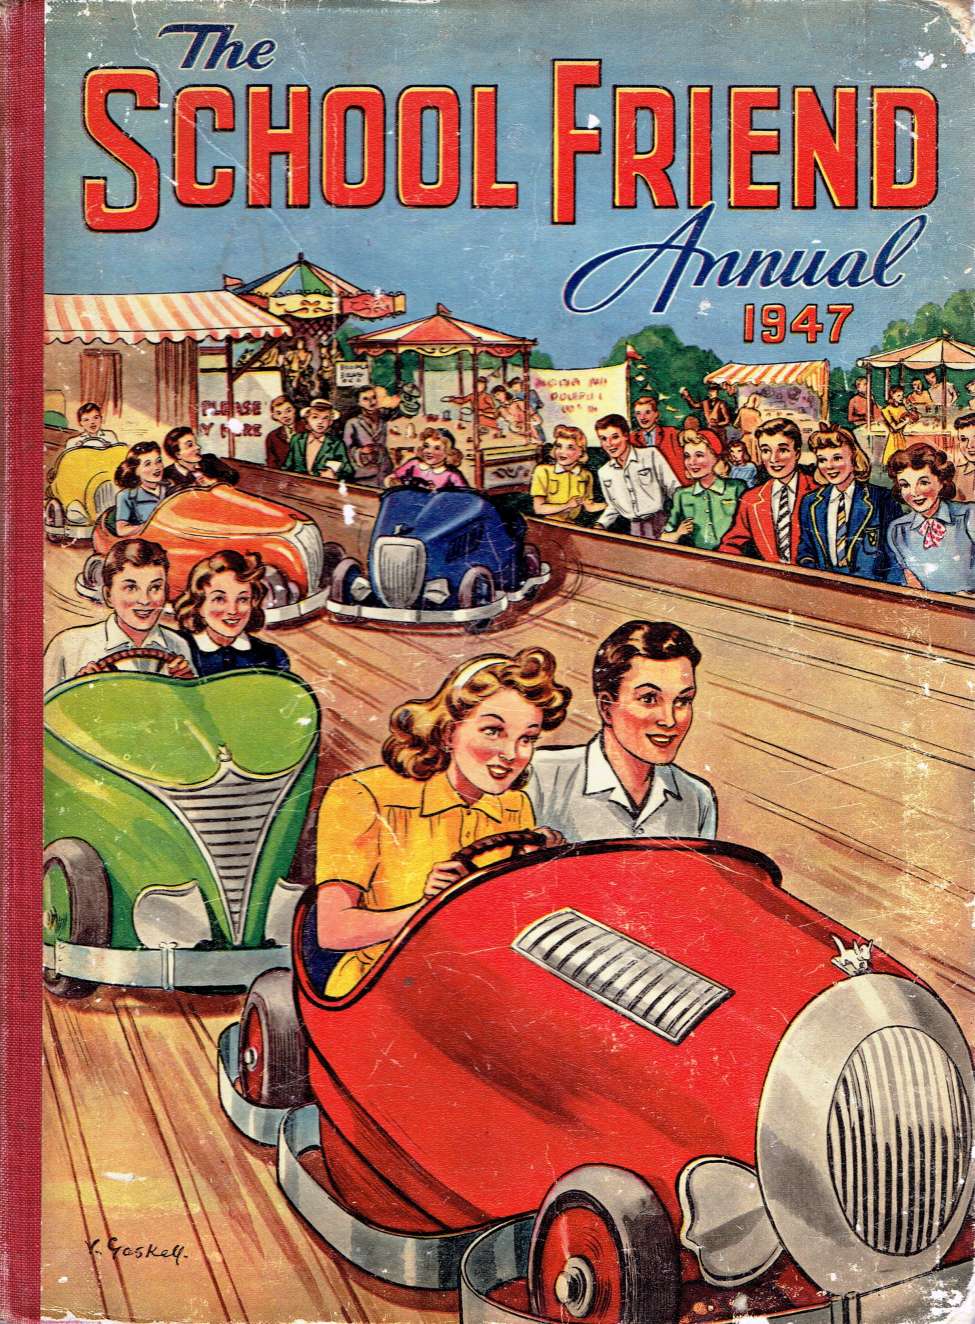 Comic Book Cover For The School Friend Annual 1947 (1 of 2)